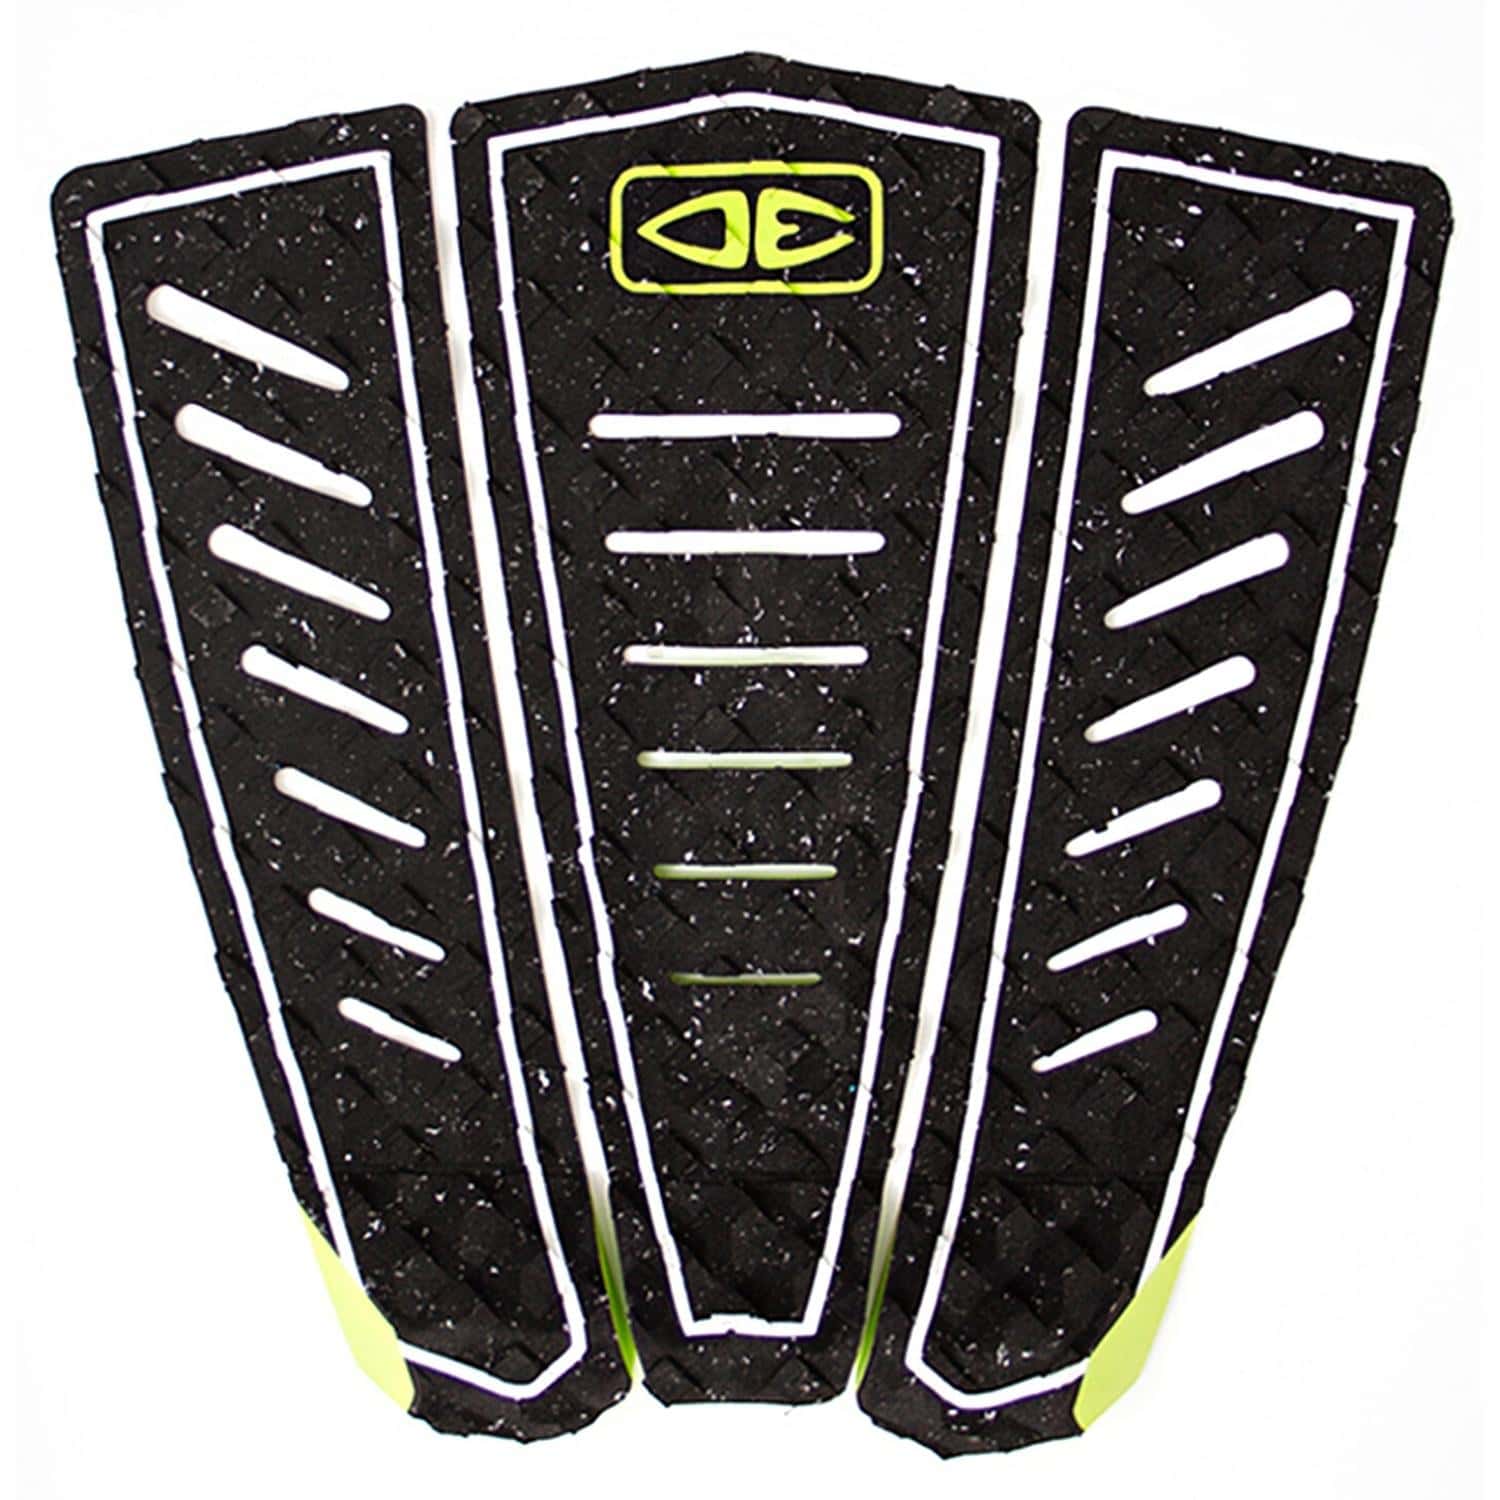 Photos - Surfing & Wakeboarding Ocean And Earth Kanoa Igarashi Pro Surfboard Tail Pad - Black/Lime